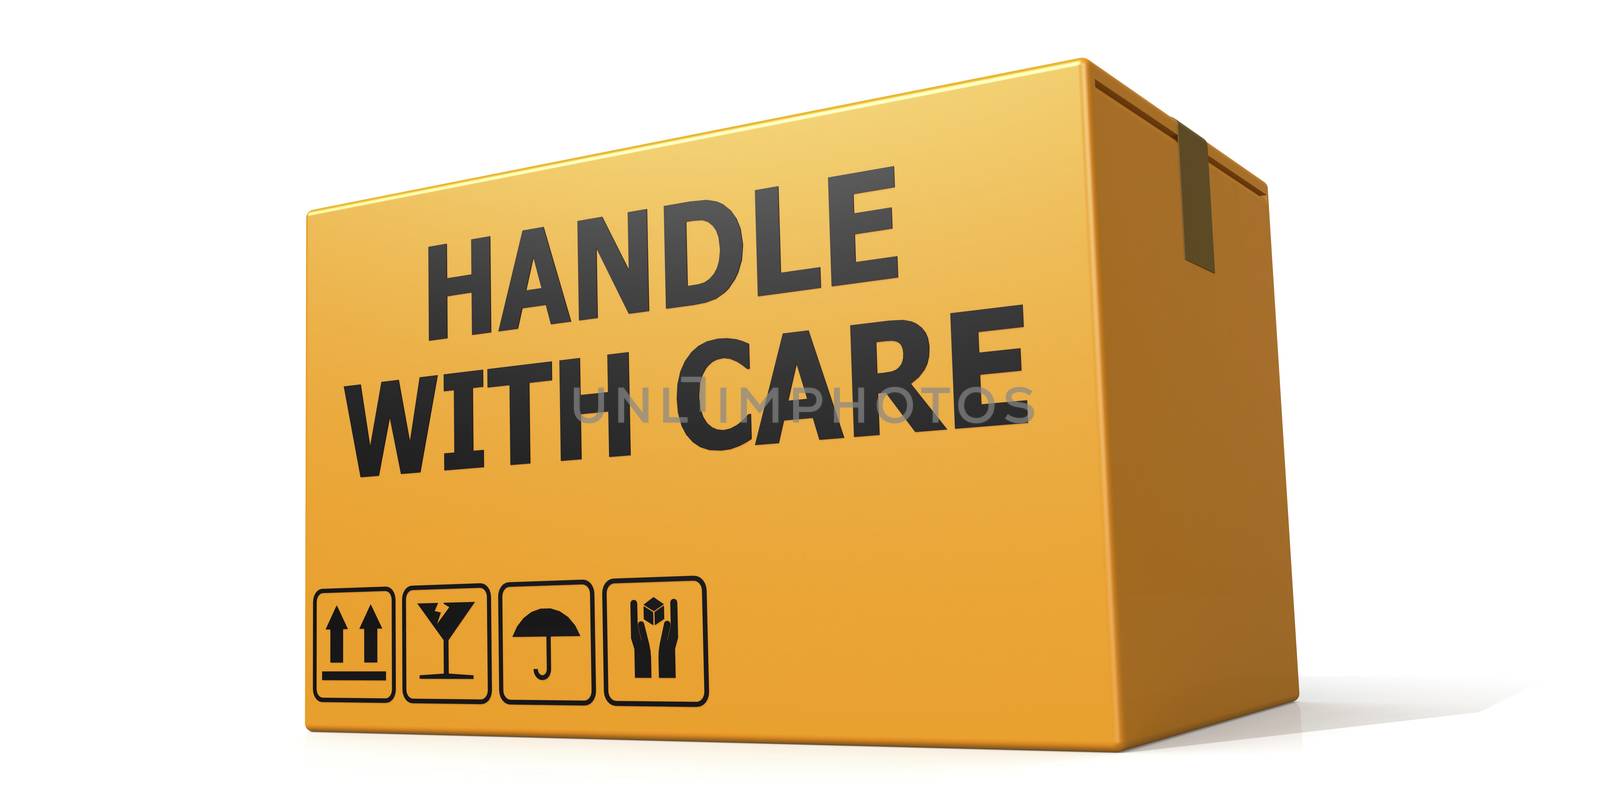 Cardboard boxes isolated with handle with care text by tang90246